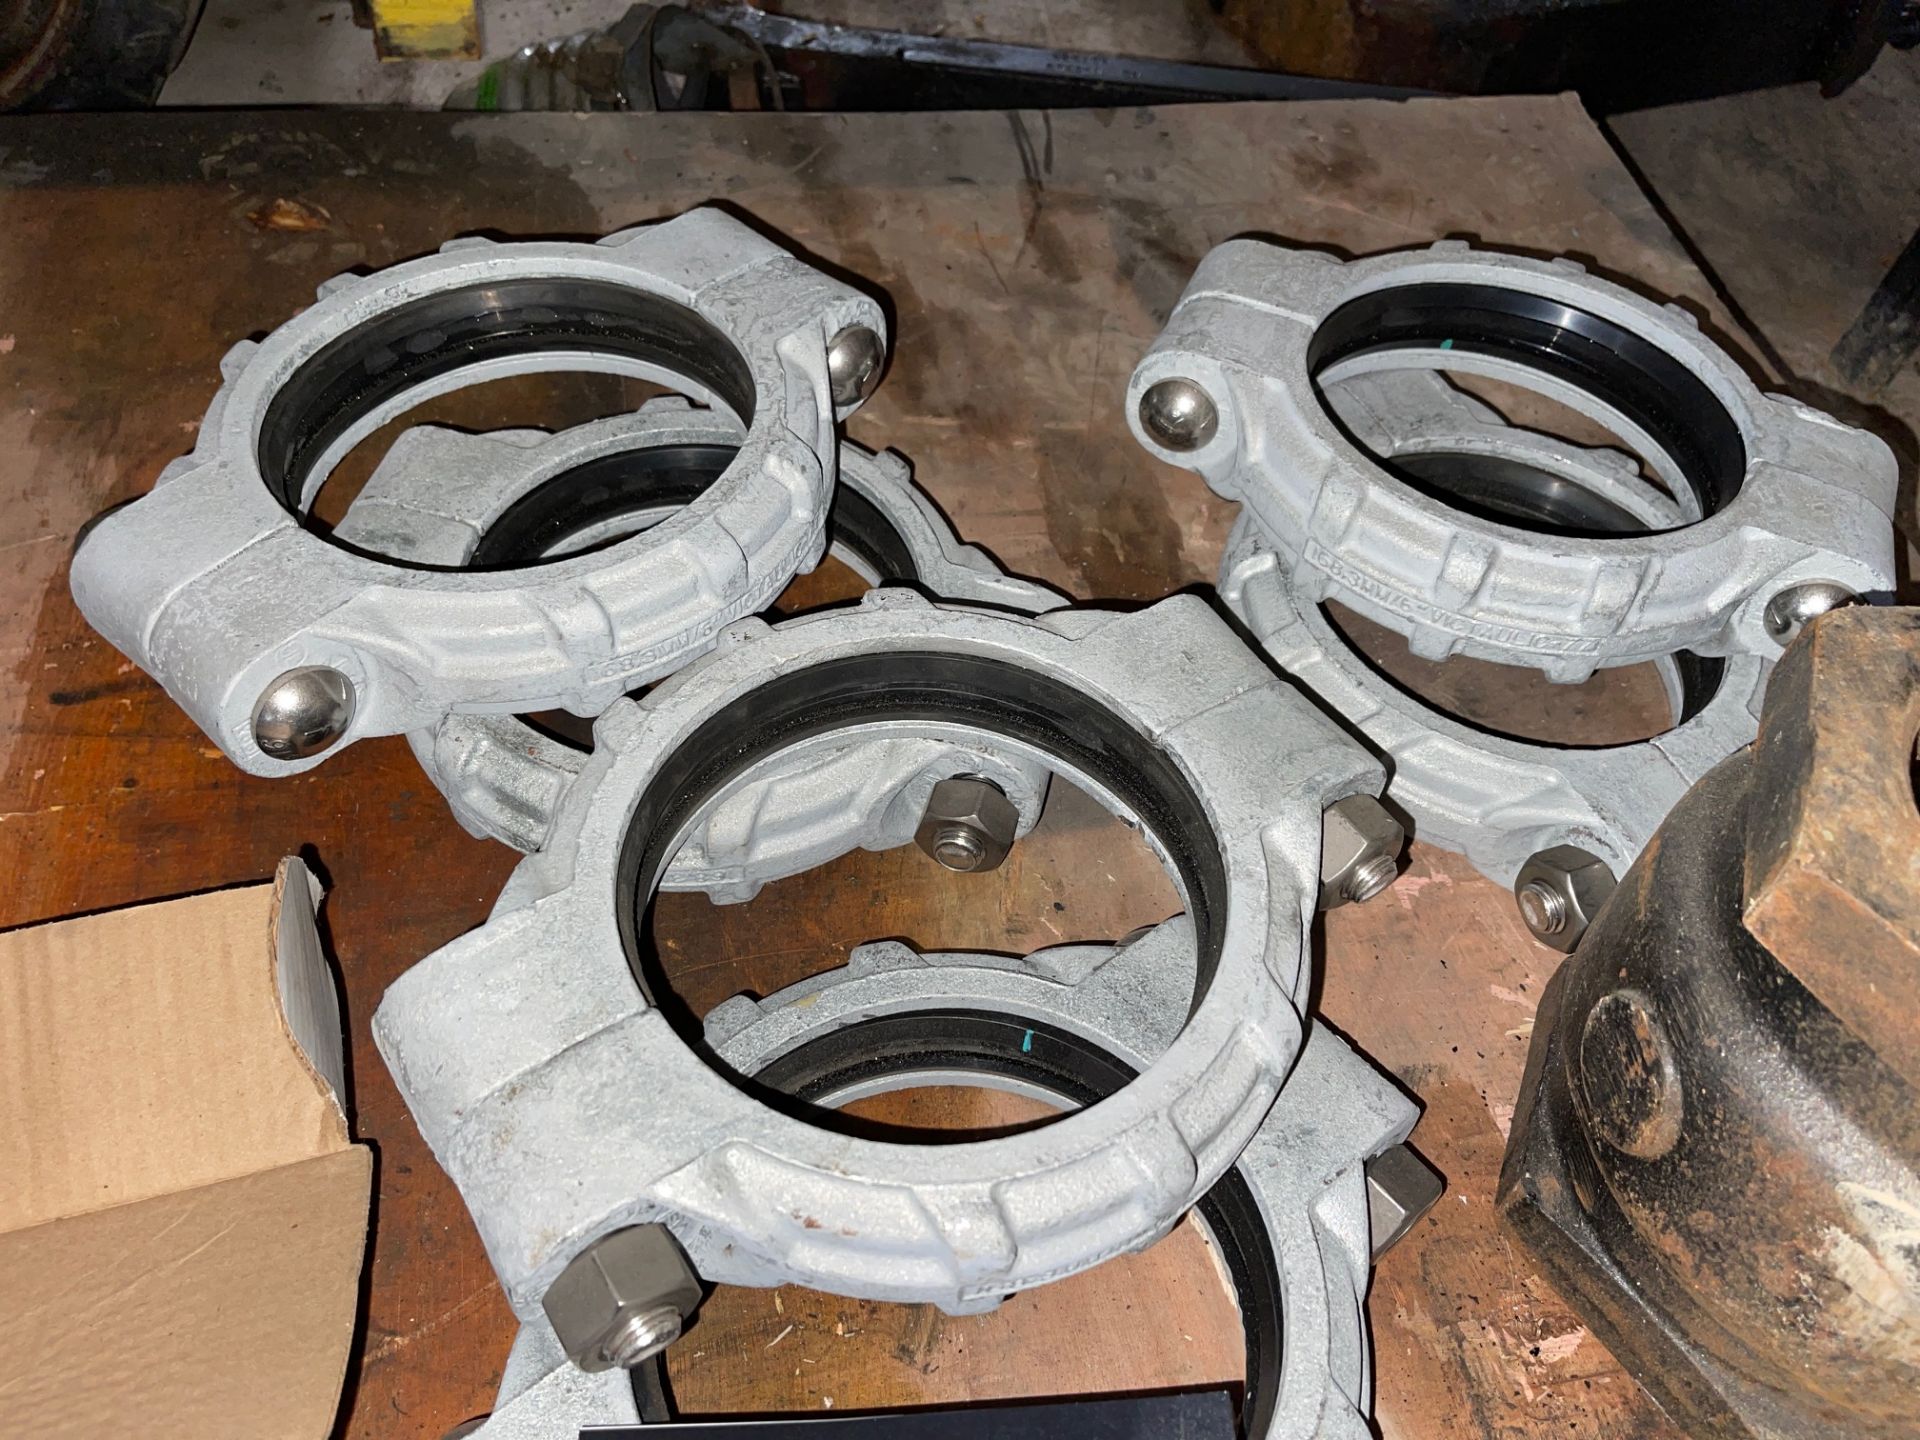 6” GALVANIZED VICTAULIC JOINERS WITH SS HARDWARE (6), JENKINS 4” GATE VALVE, 200 PSI WOG, MOD1255, - Image 2 of 2